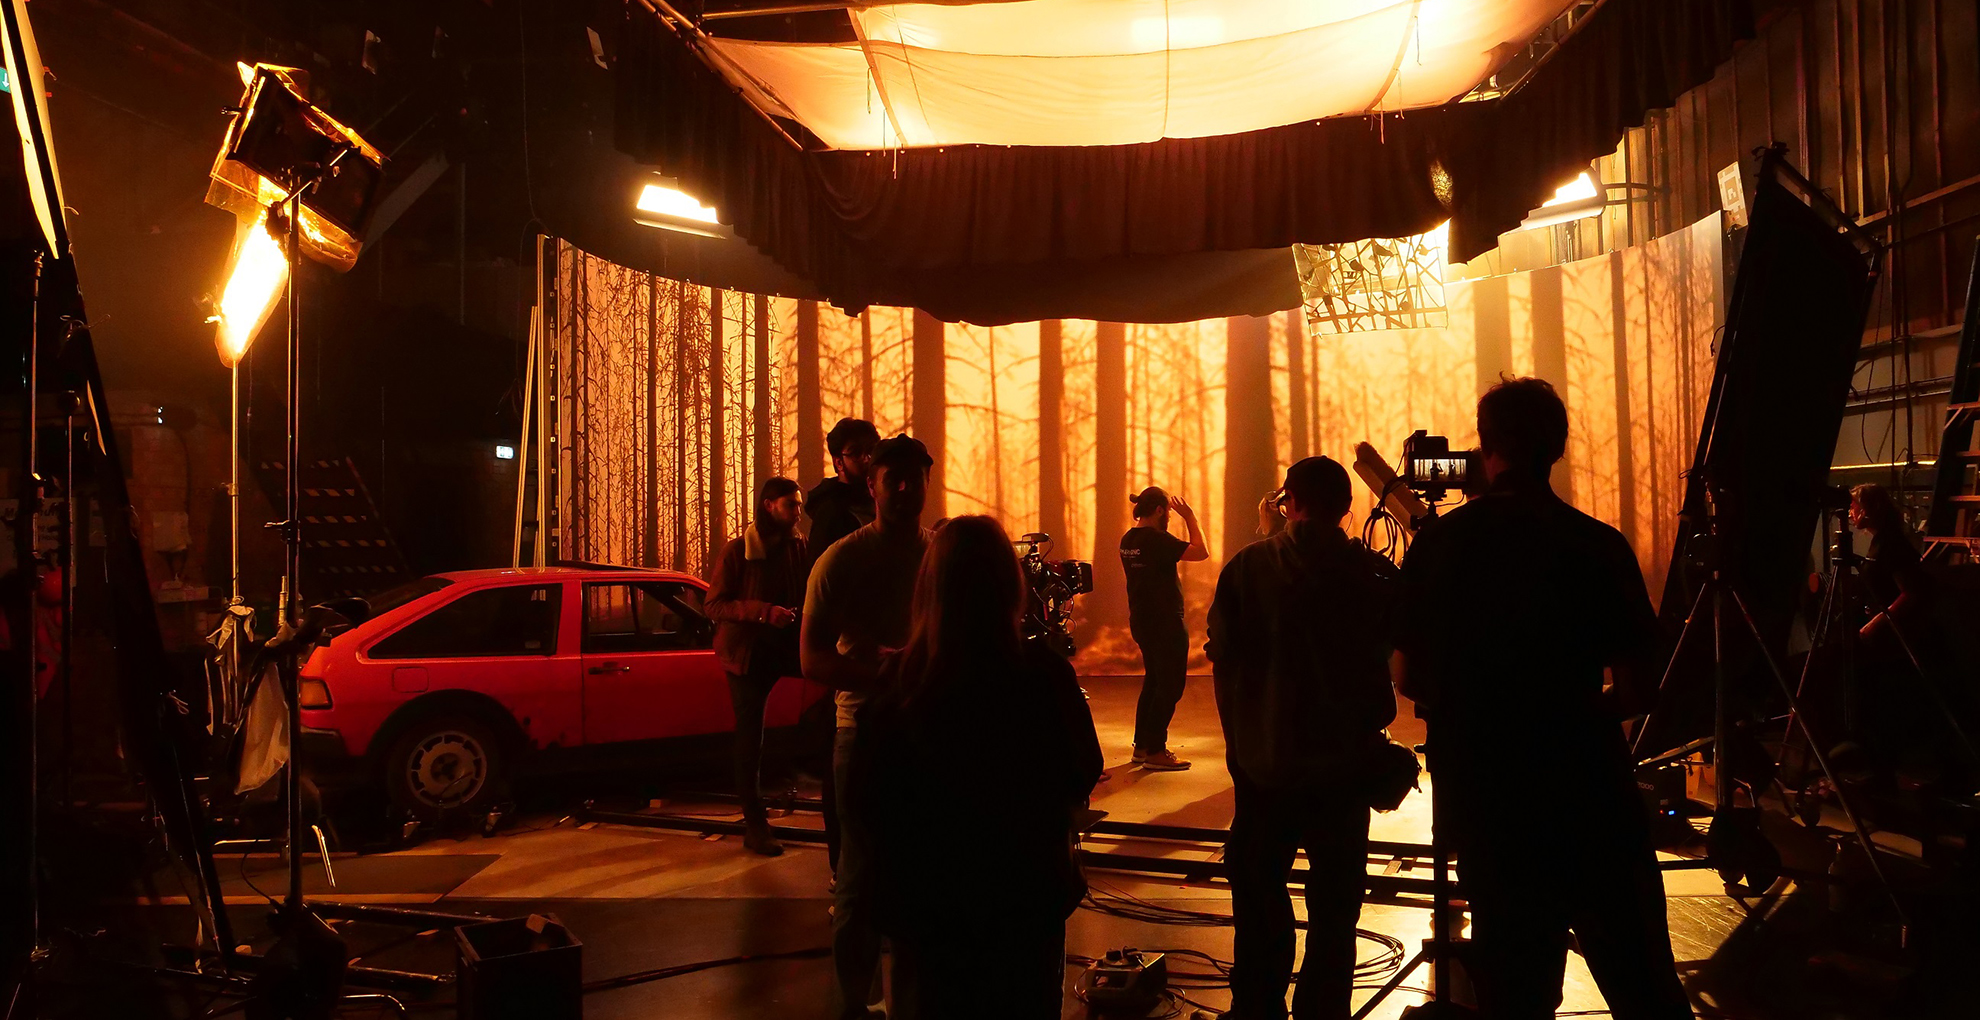 The National Film and Television School courses are now accepting applications